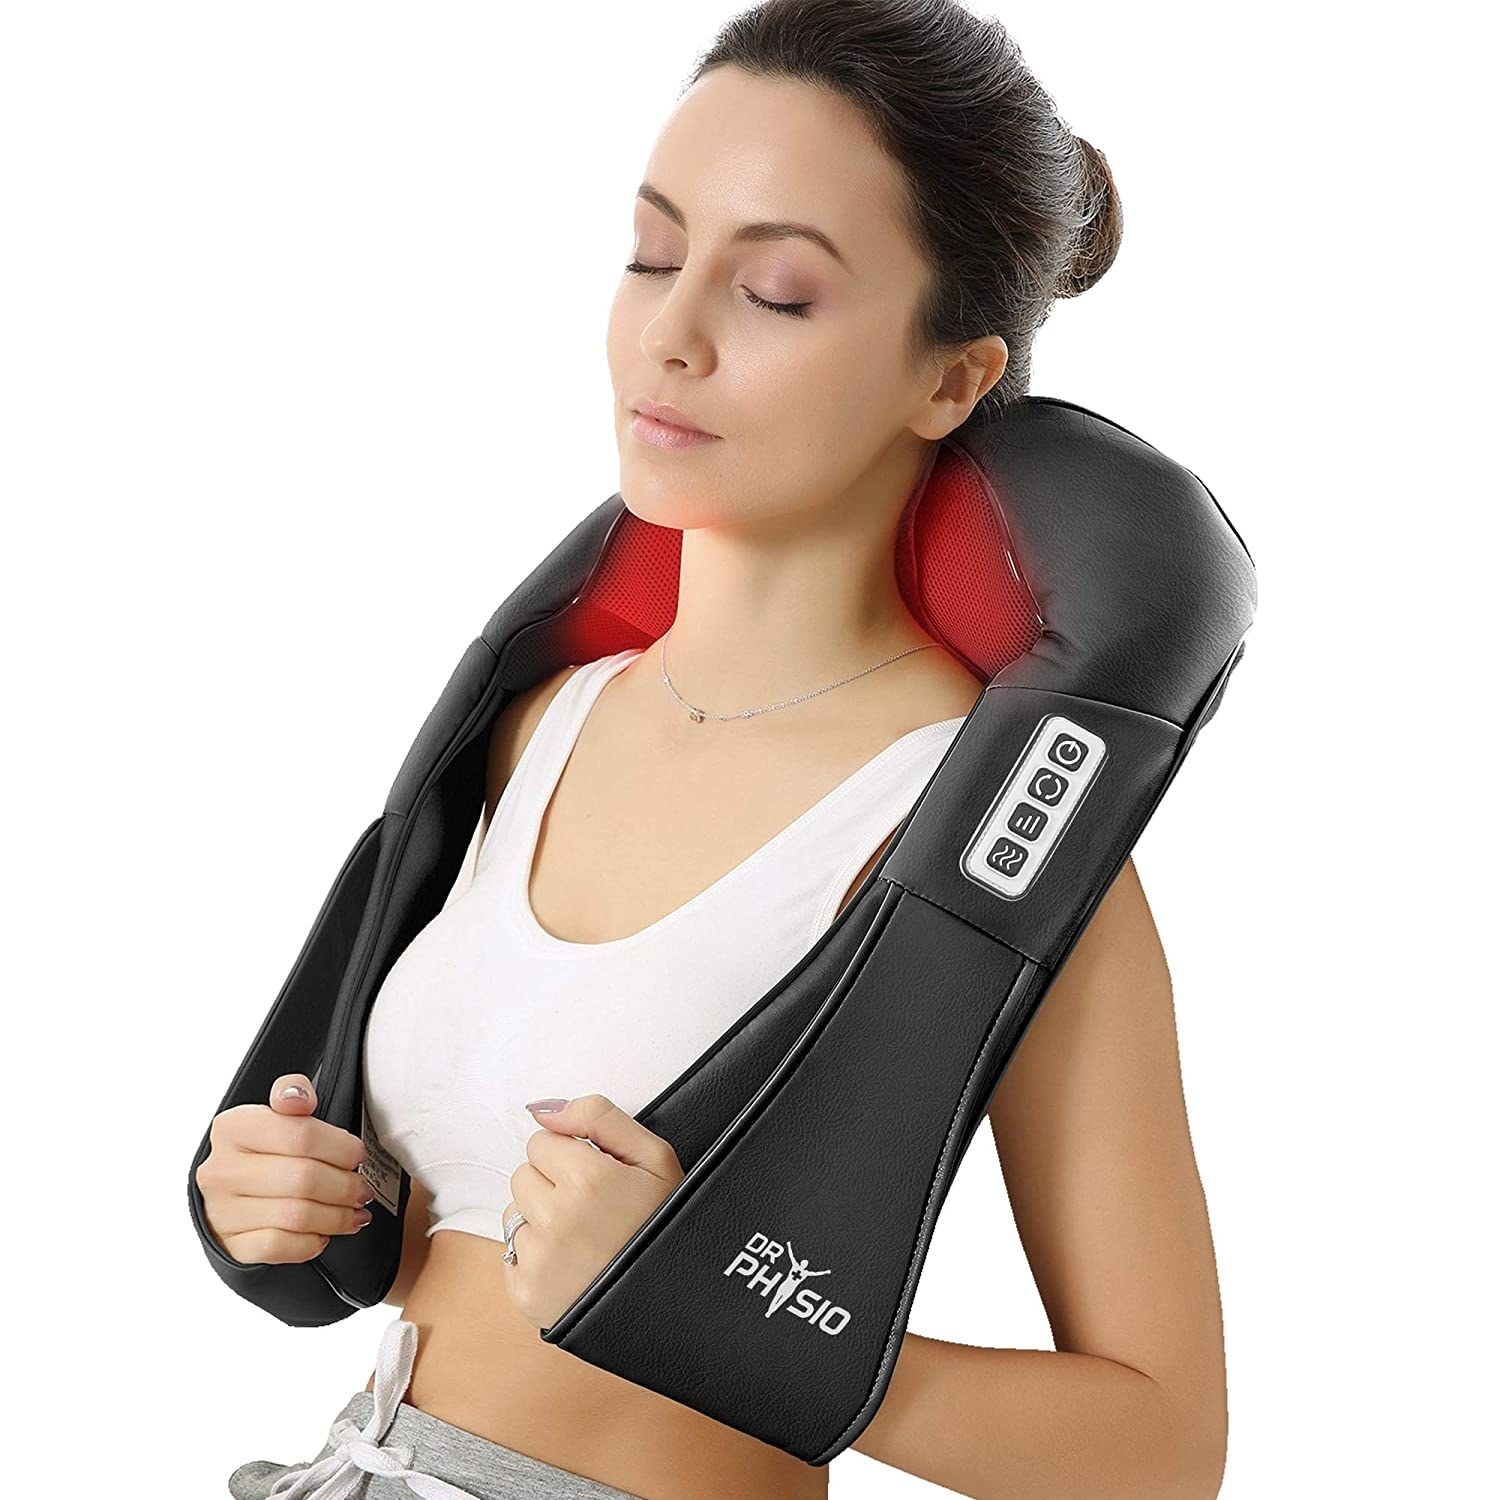 A woman using the massager on her shoulder